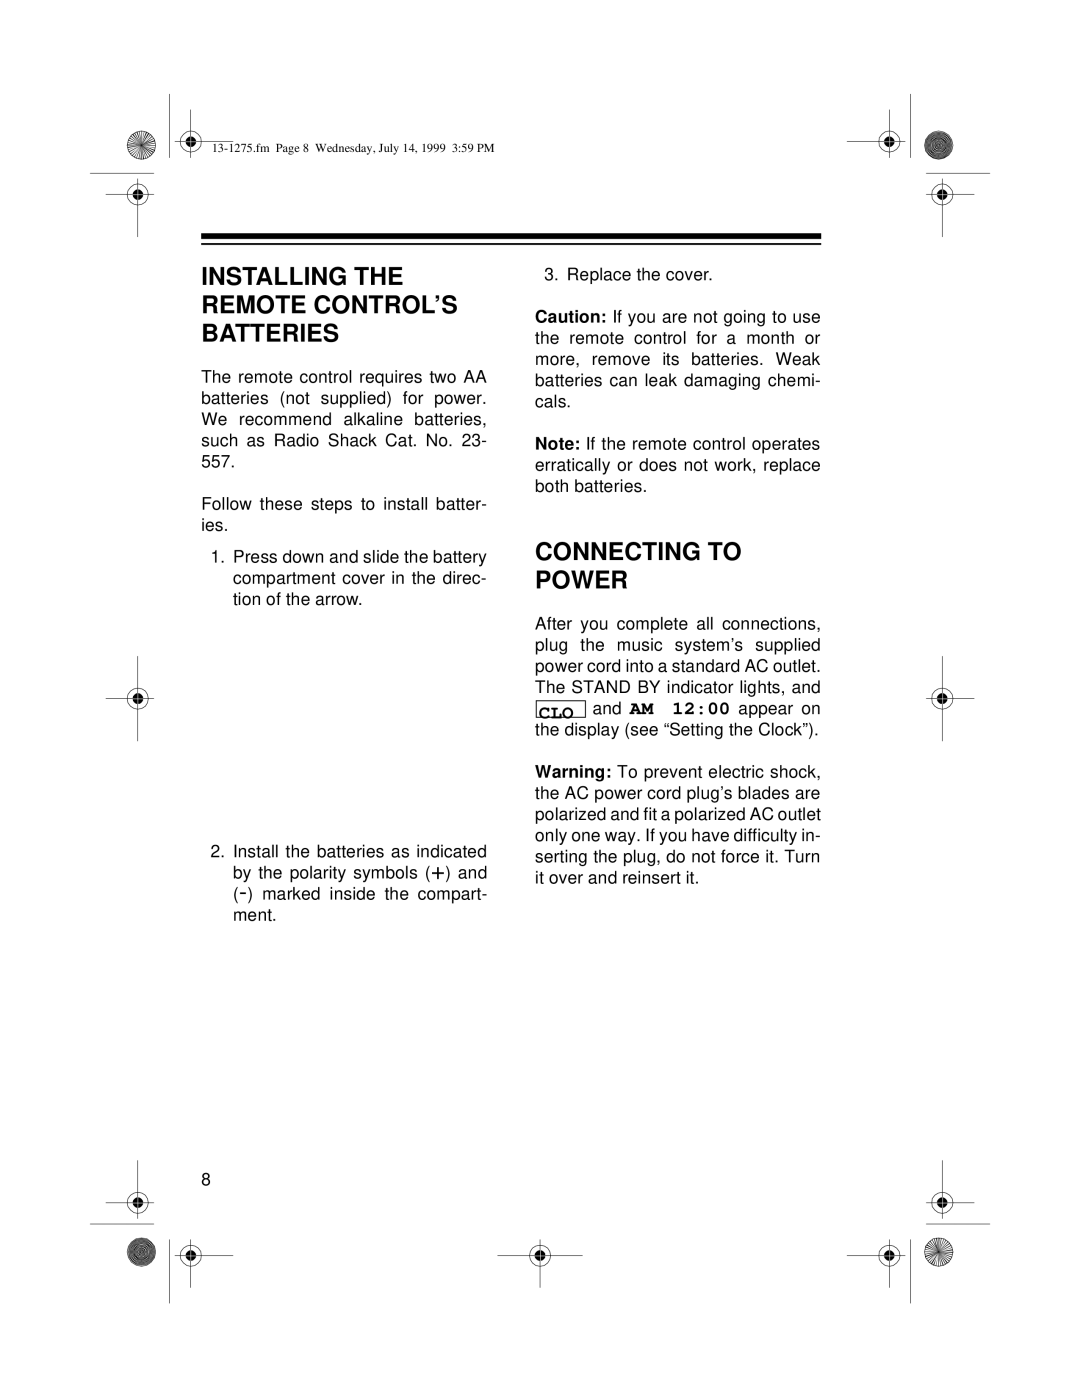 Optimus SYSTEM 728 owner manual Connecting To Power, Installing The Remote Control’S Batteries 